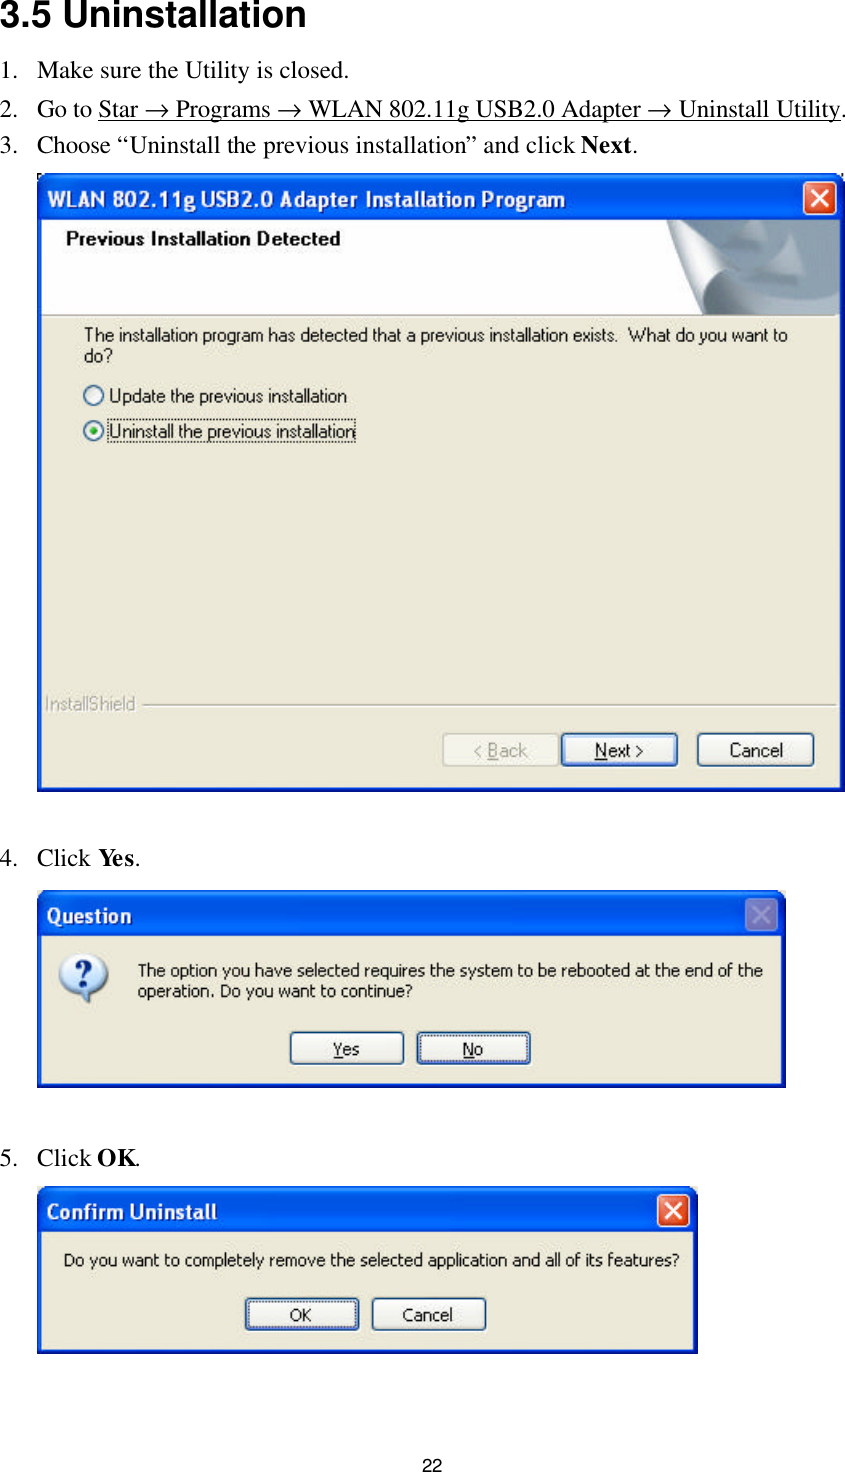  22 3.5 Uninstallation 1. Make sure the Utility is closed. 2. Go to Star → Programs → WLAN 802.11g USB2.0 Adapter → Uninstall Utility. 3. Choose “Uninstall the previous installation” and click Next.   4. Click Yes.   5. Click OK.   